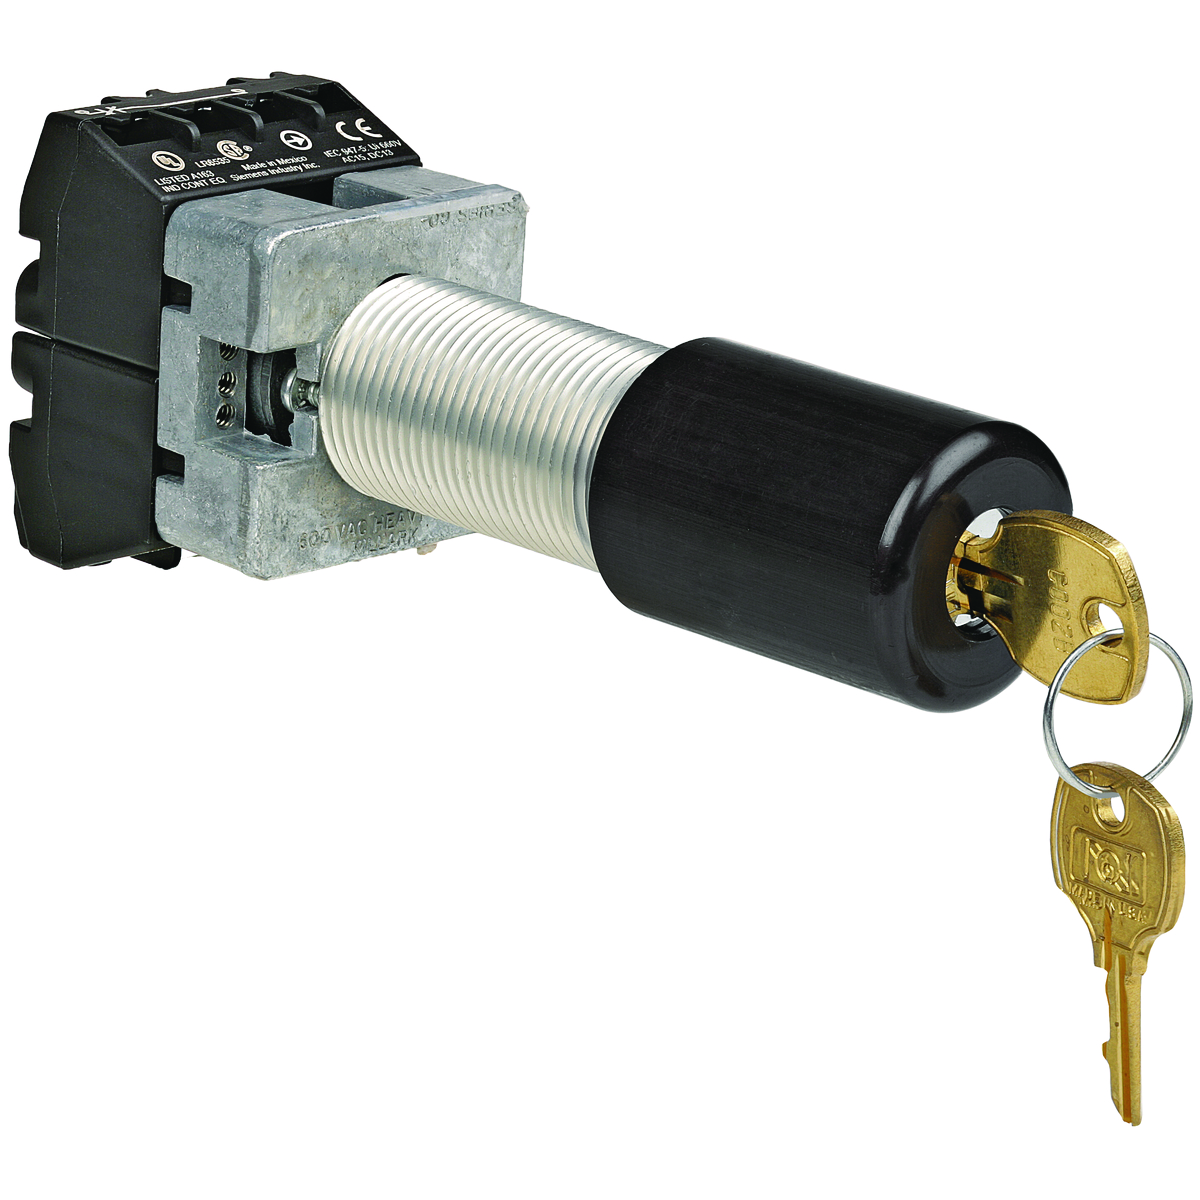 G SERIES - ALUMINUM SHORT MAINTAINED CONTACT 3-POSITION KEYED SELECTORSWITCH OPERATOR - KEYED DIFFERENT WITH KEY REMOVAL IN CENTER POSITION -